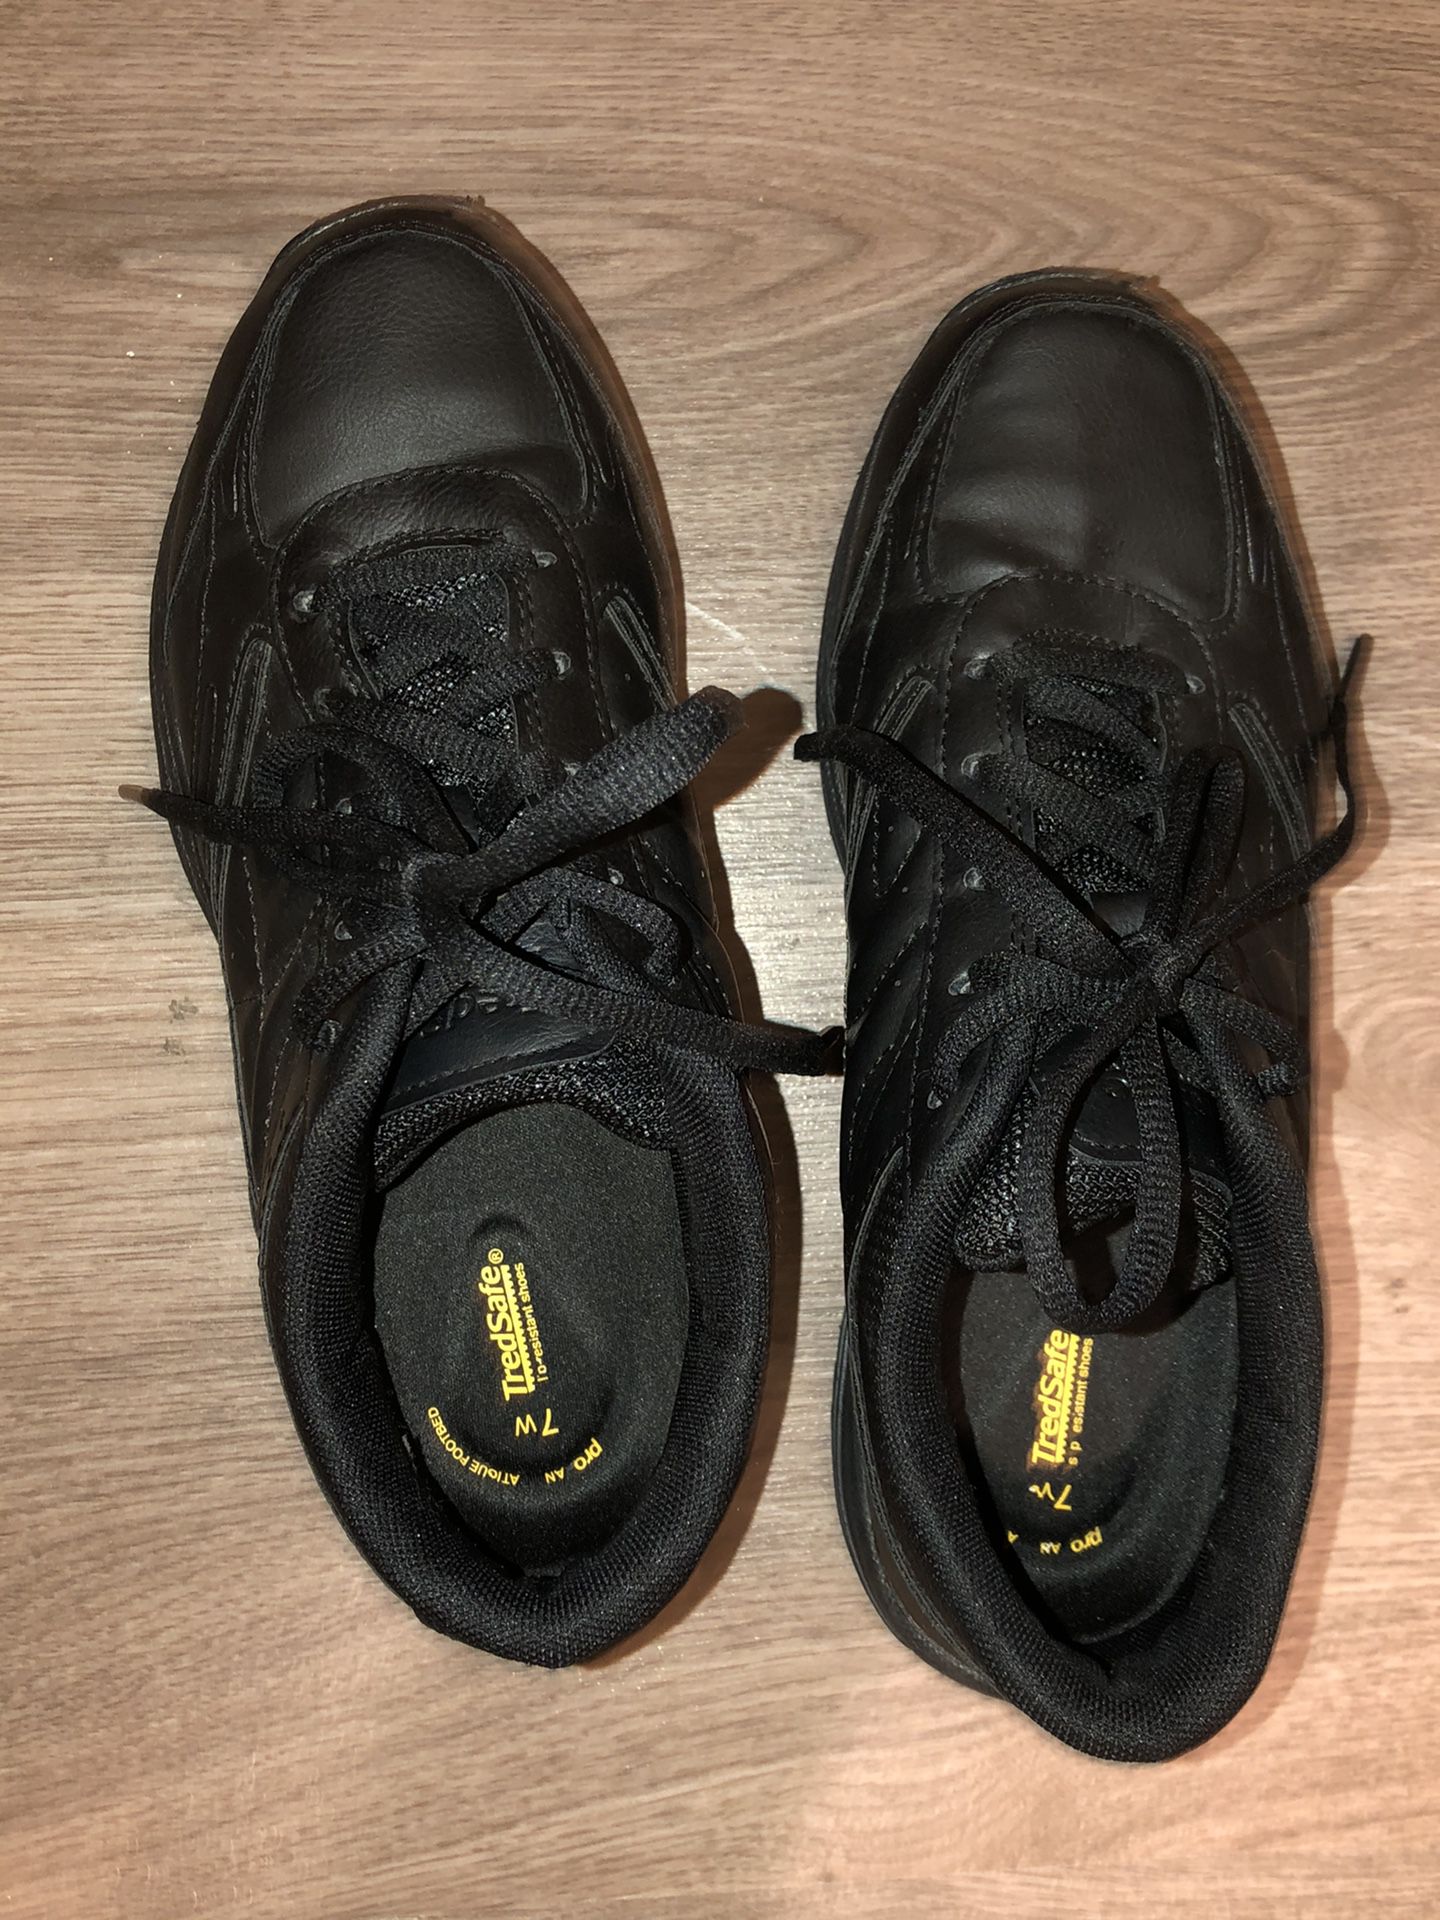 Tred safe non-slip shoes (work-related typically)